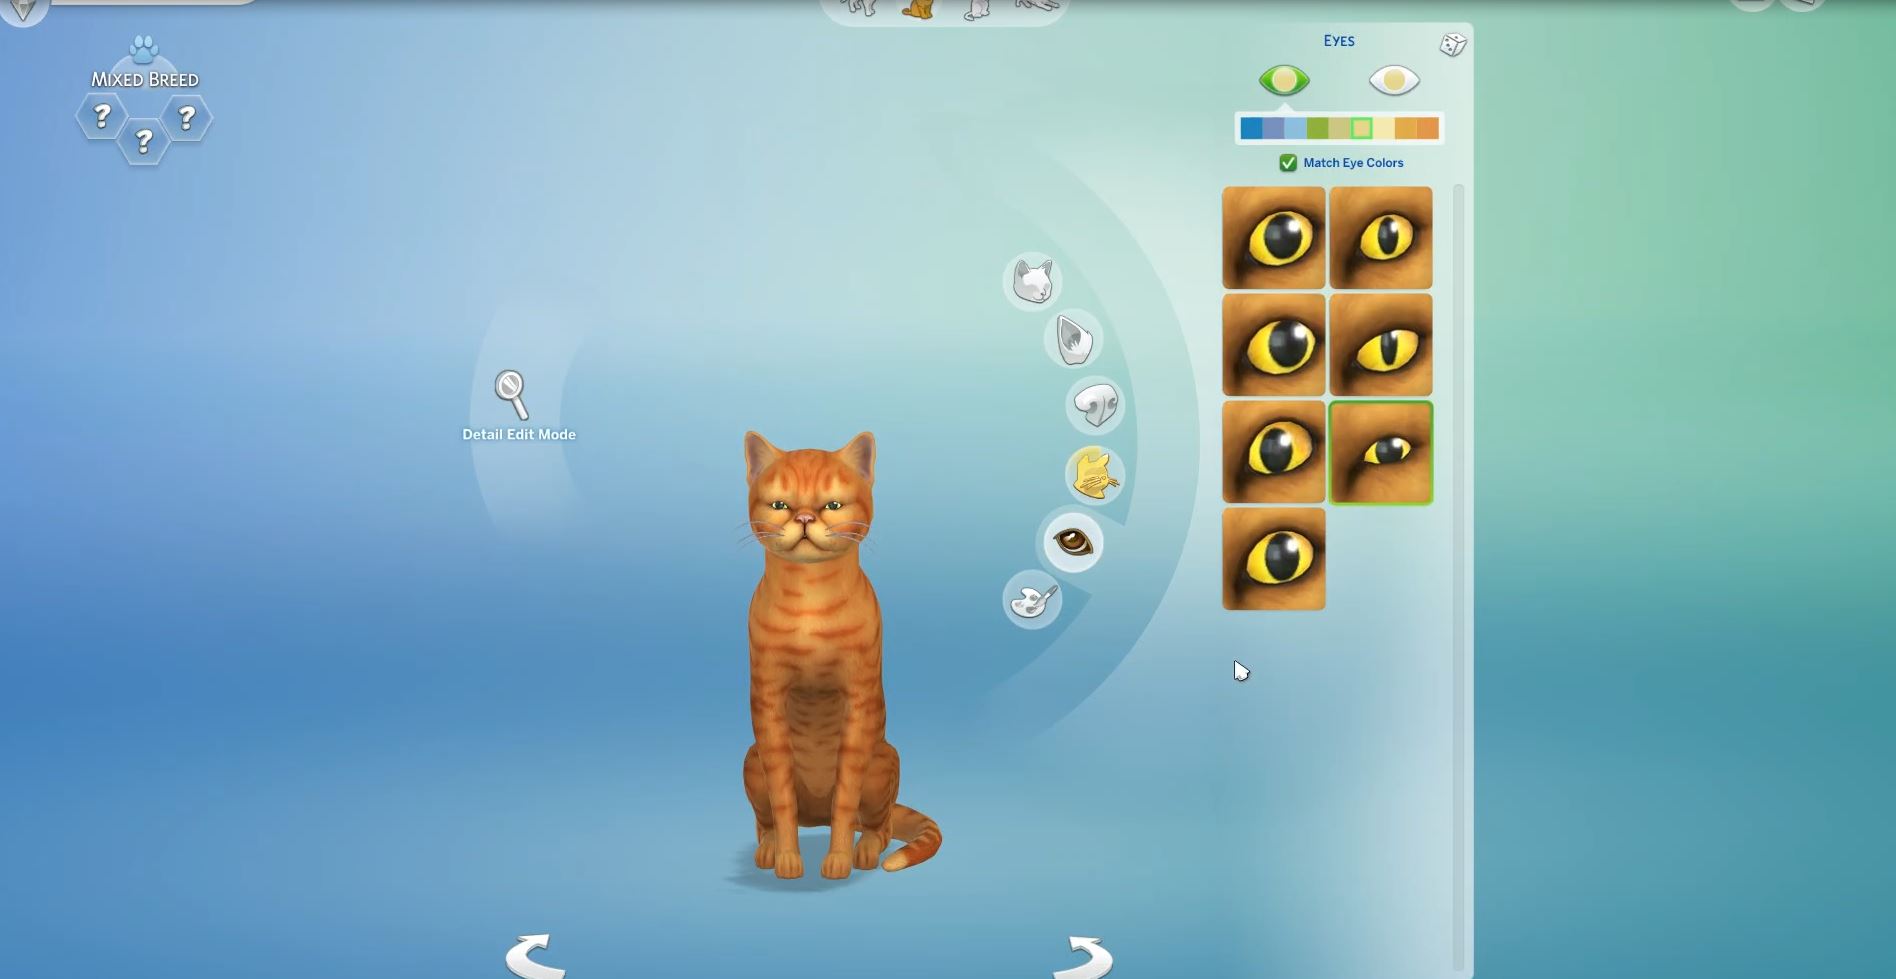 The Sims 4 Cats & Dogs: 45 Create-a-Pet Screenshots! (HQ ...